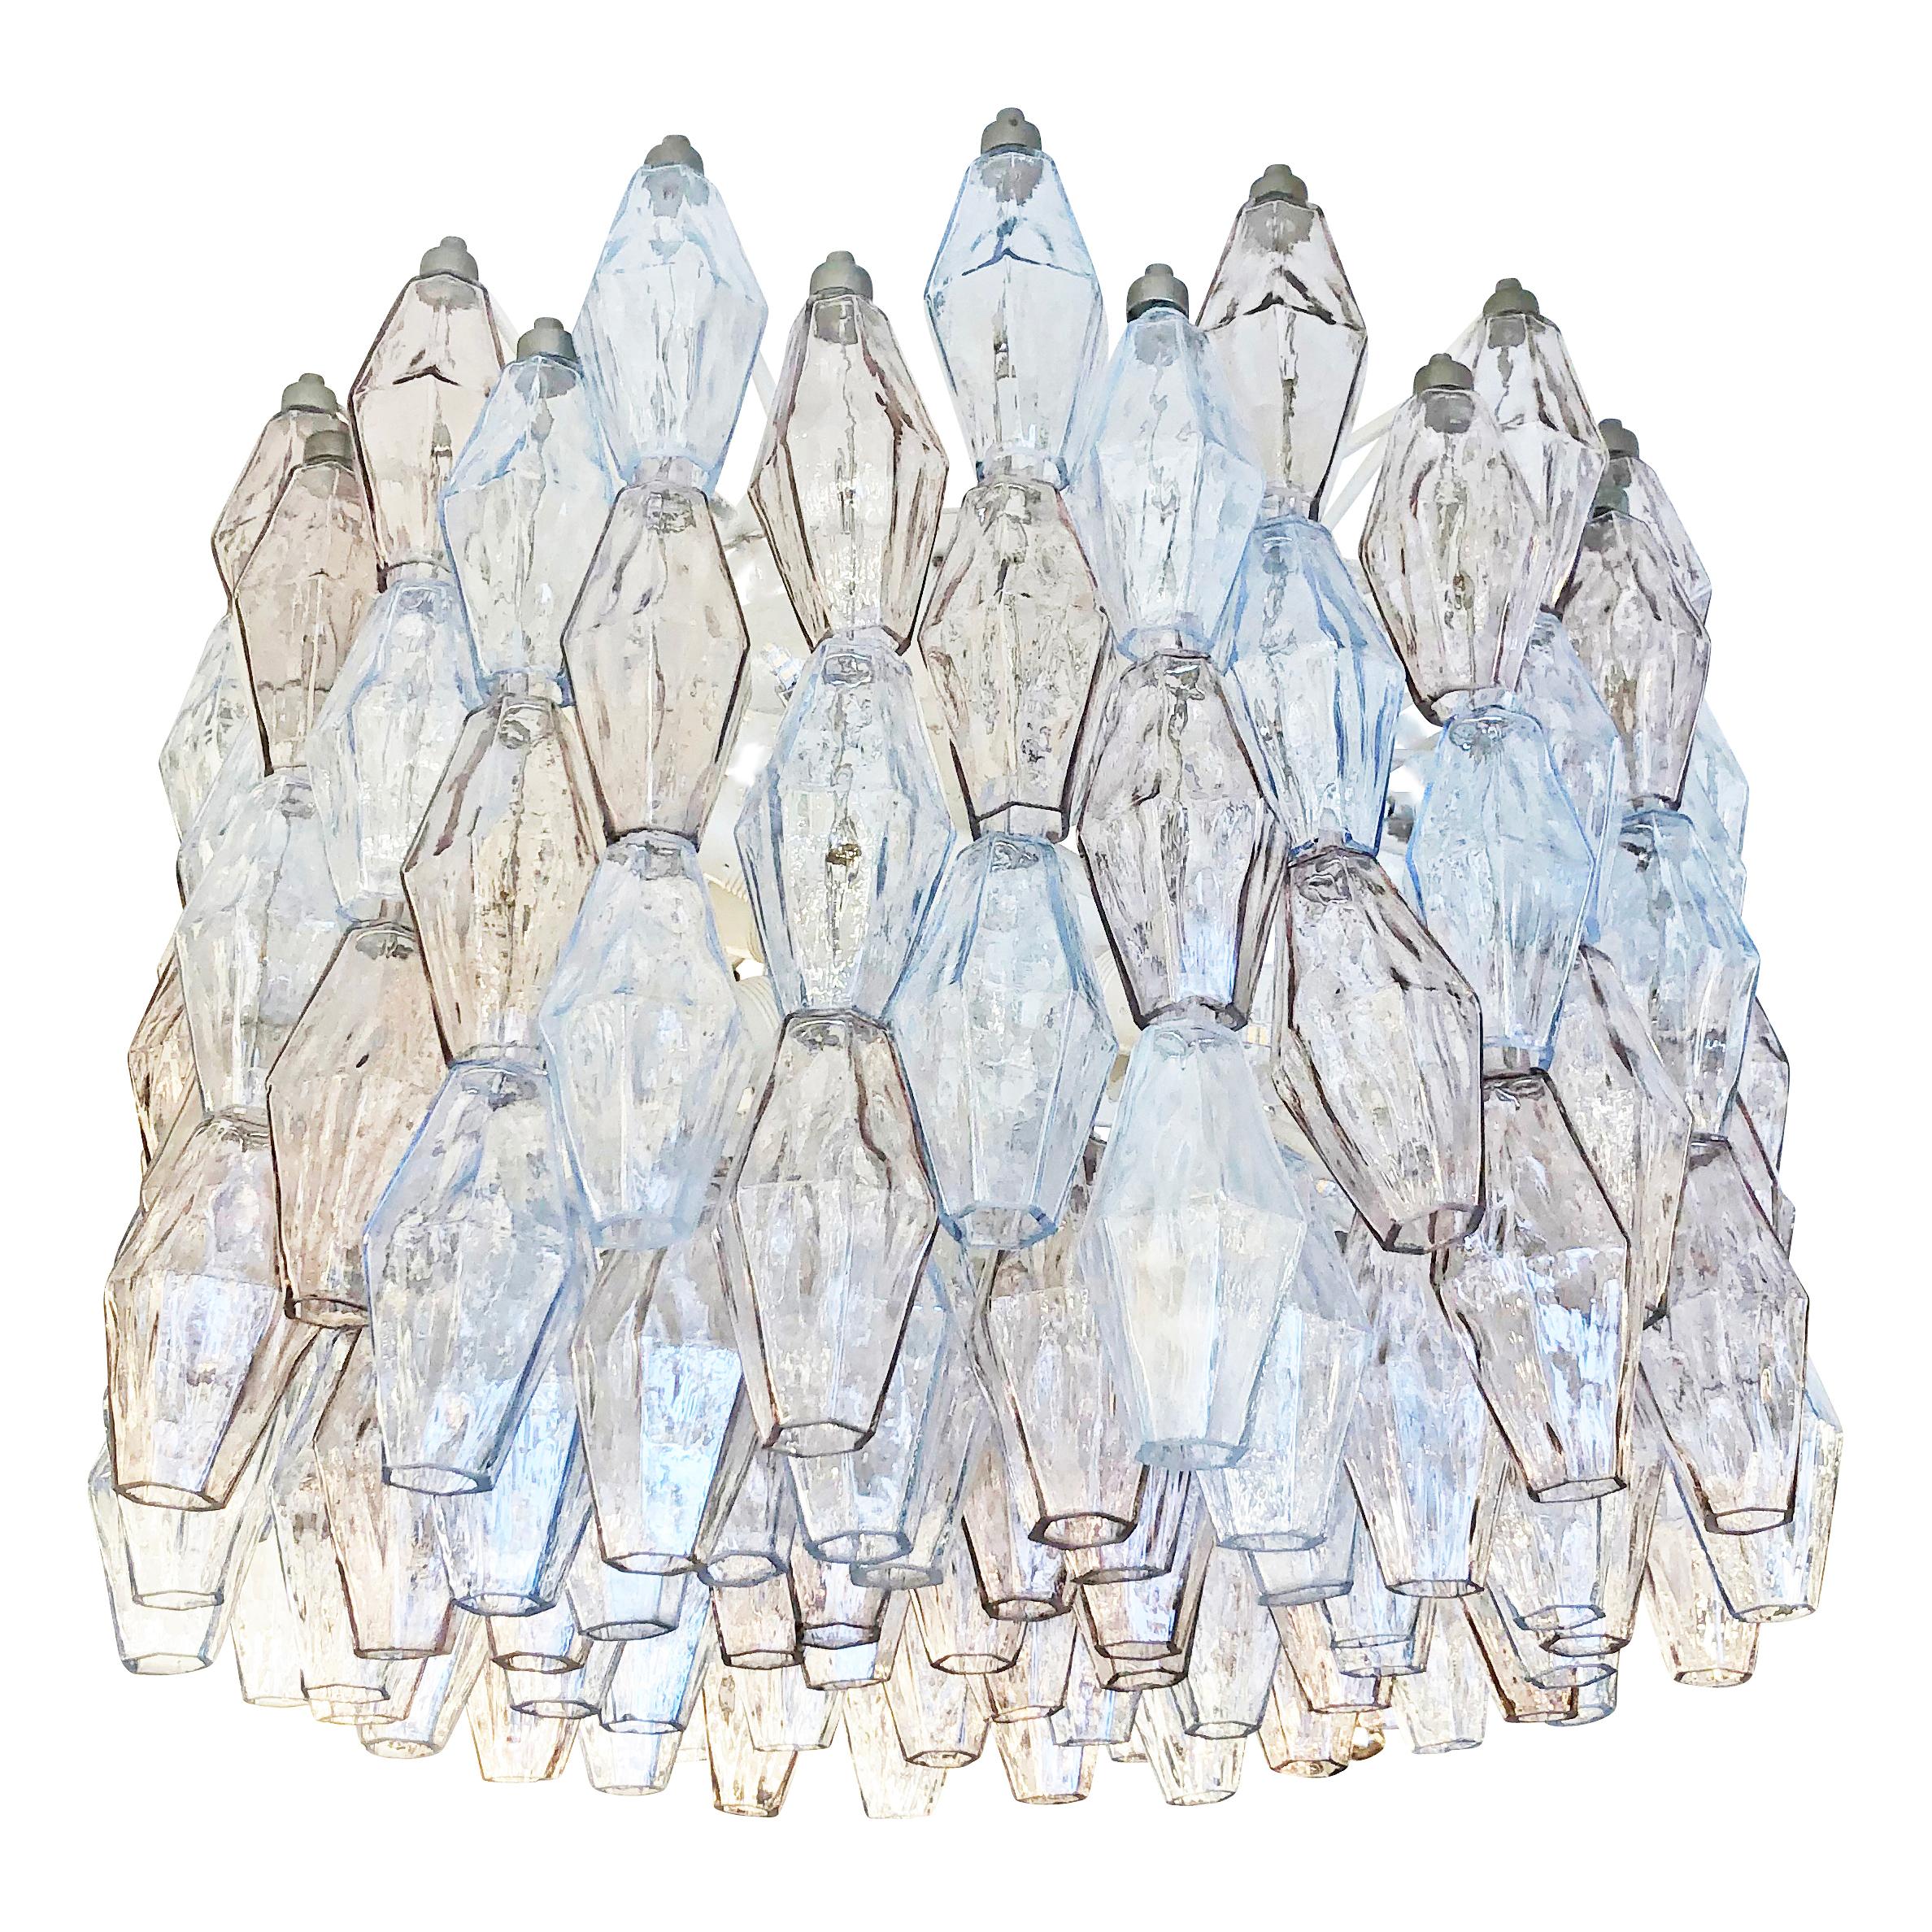 Midcentury chandelier by Venini made with their iconic poliedri Murano glasses. The glasses are a mix of light blue ones and light rose’ ones mounted on a white lacquered frame. Ready to hang on a chain.

Condition: Excellent vintage condition,